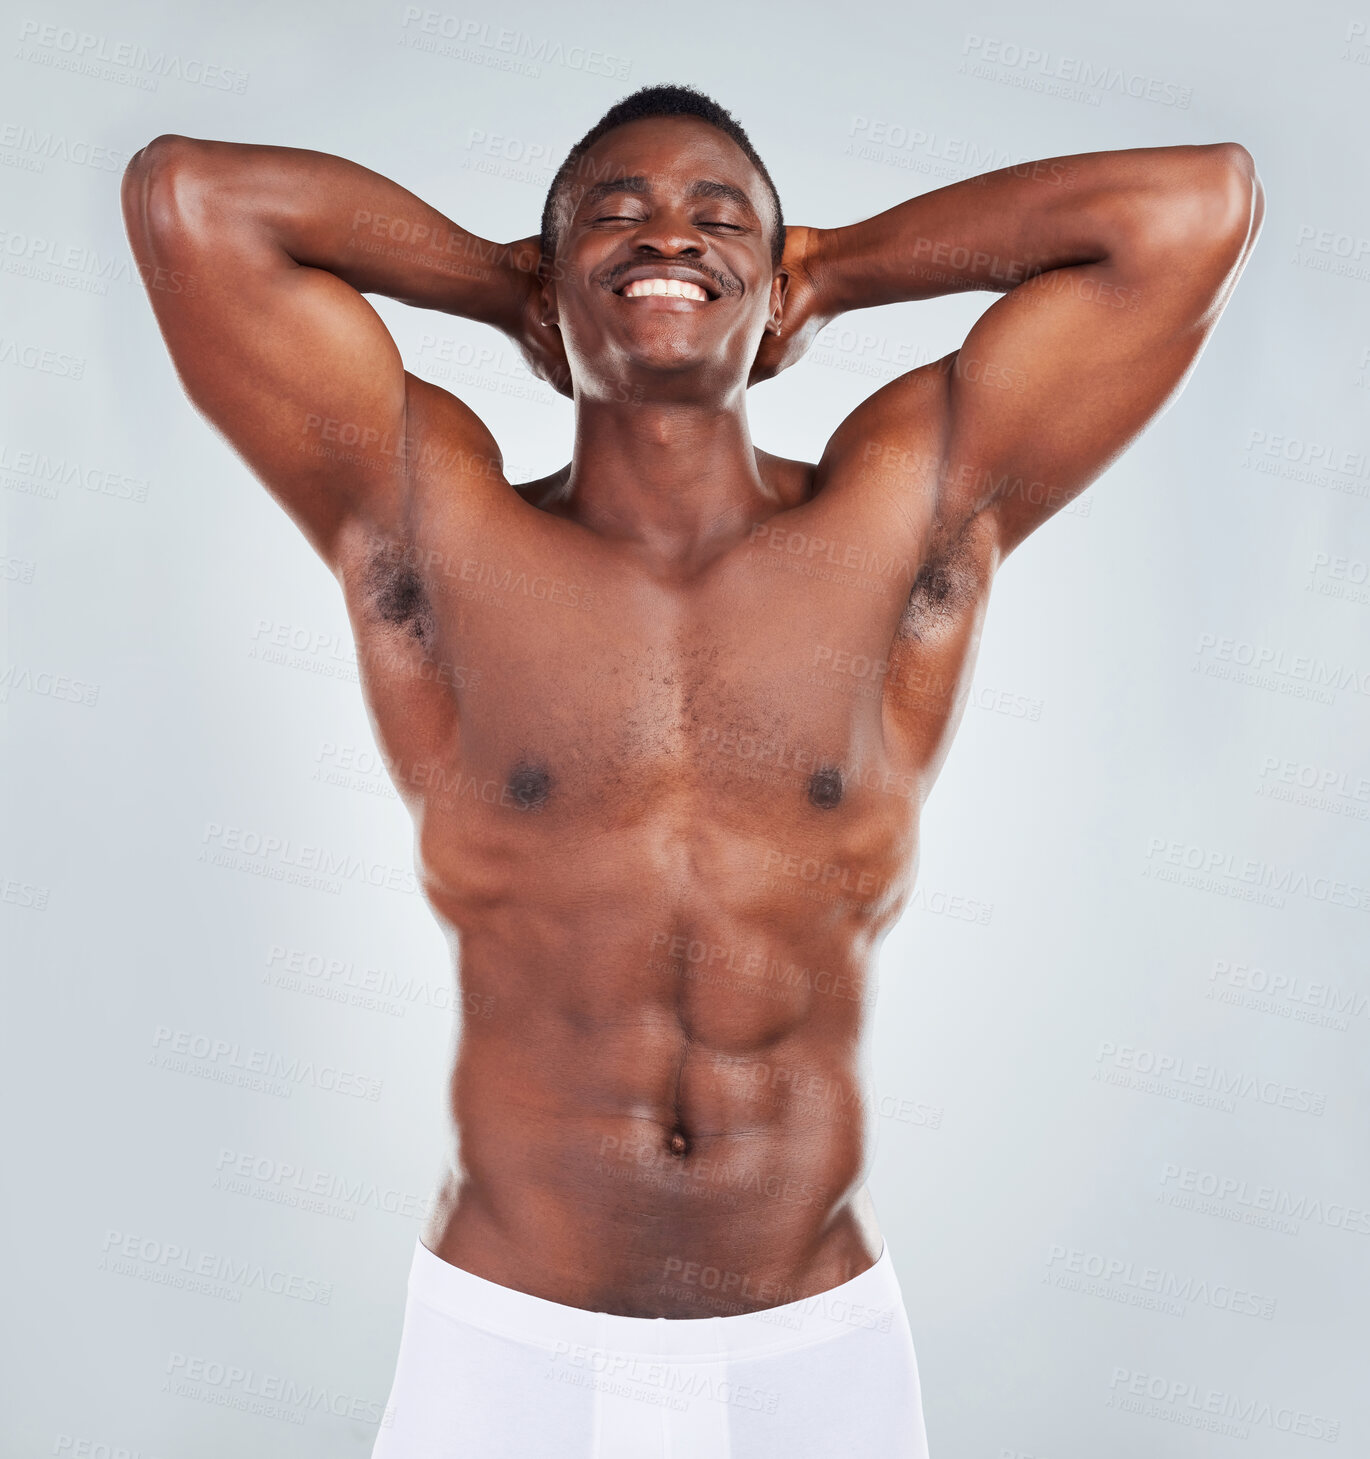 Buy stock photo Portrait of a smiling African American fitness model posing topless in a underwear and looking muscular. Happy black male athlete isolated on grey copyspace in a studio wearing boxers